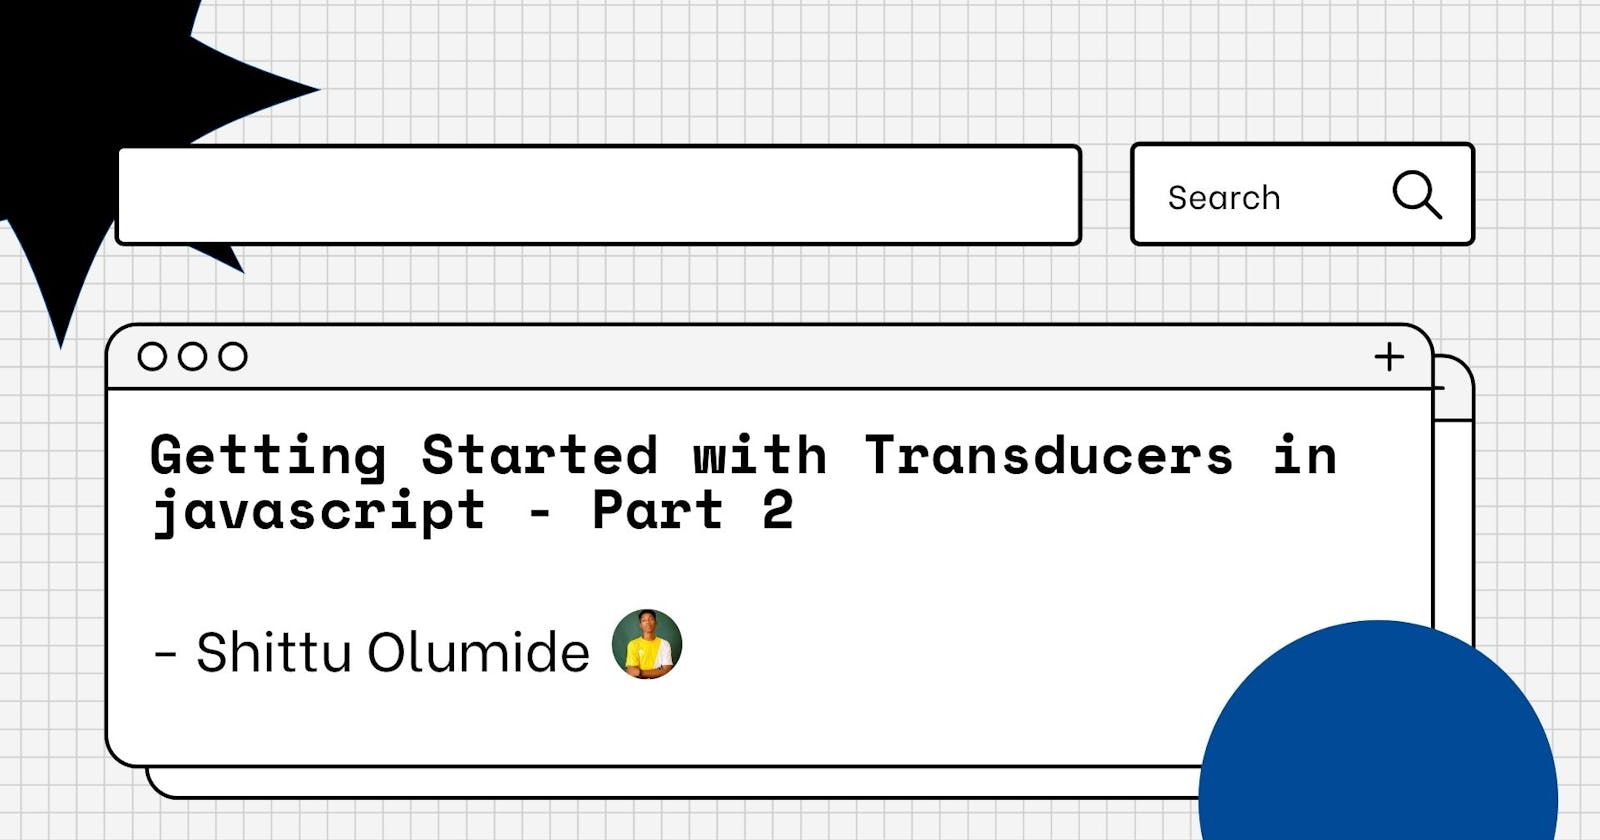 Getting Started with Transducers in javascript - Part 2